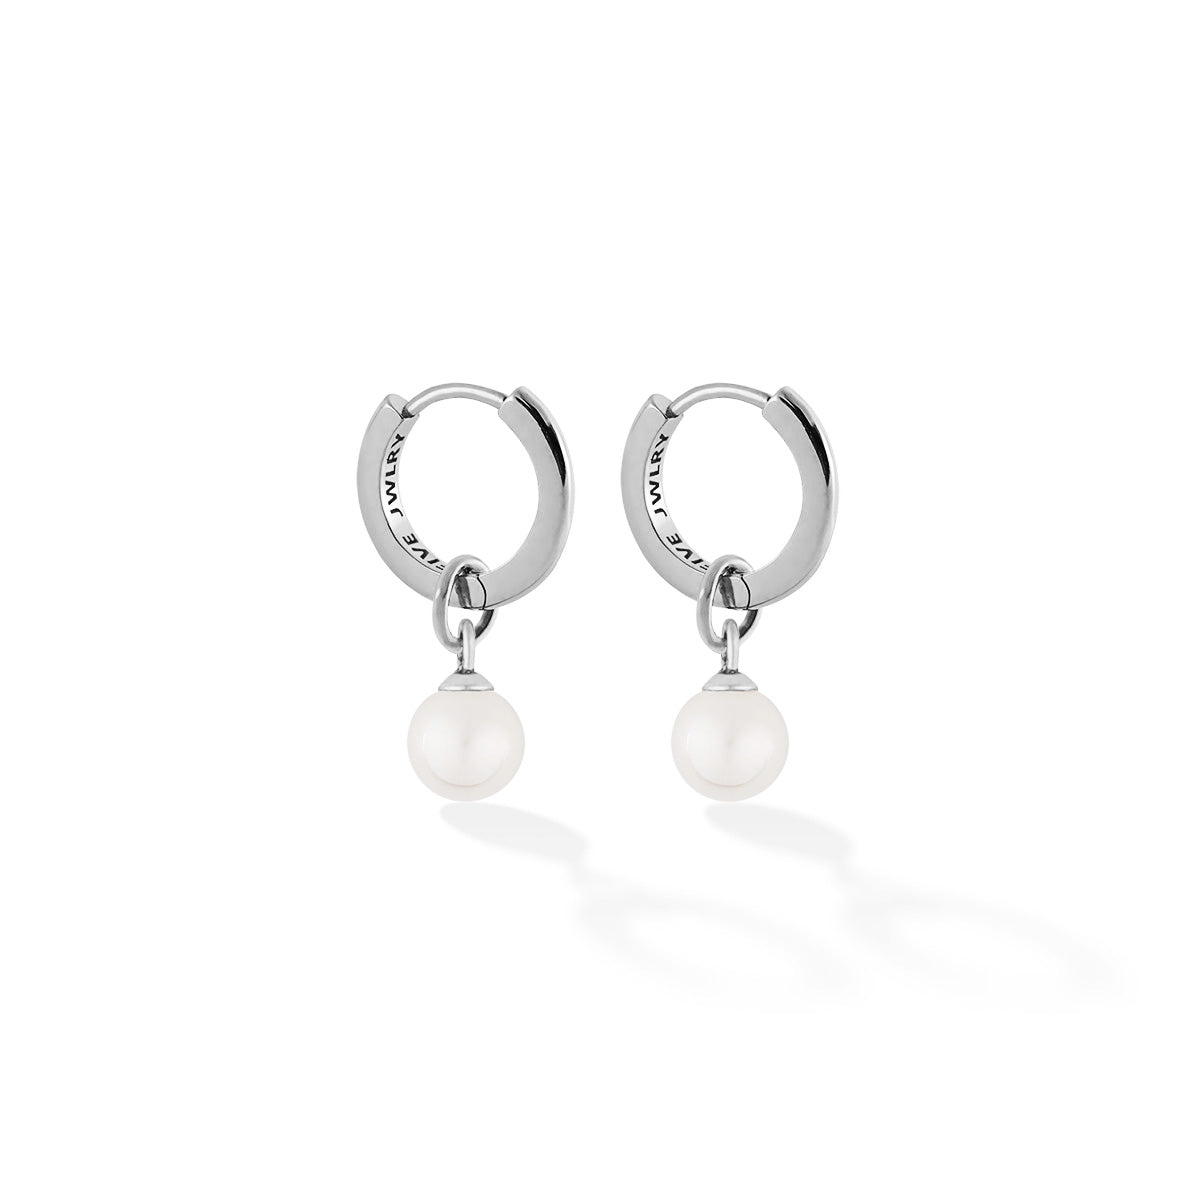 SOCA women's earring by Five Jwlry. A small, sleek 13mm hoop earring featuring a charm made from a small white pearl. Available in 14k gold or silver, crafted from water-resistant 316L stainless steel. Hypoallergenic with a 2-year warranty.